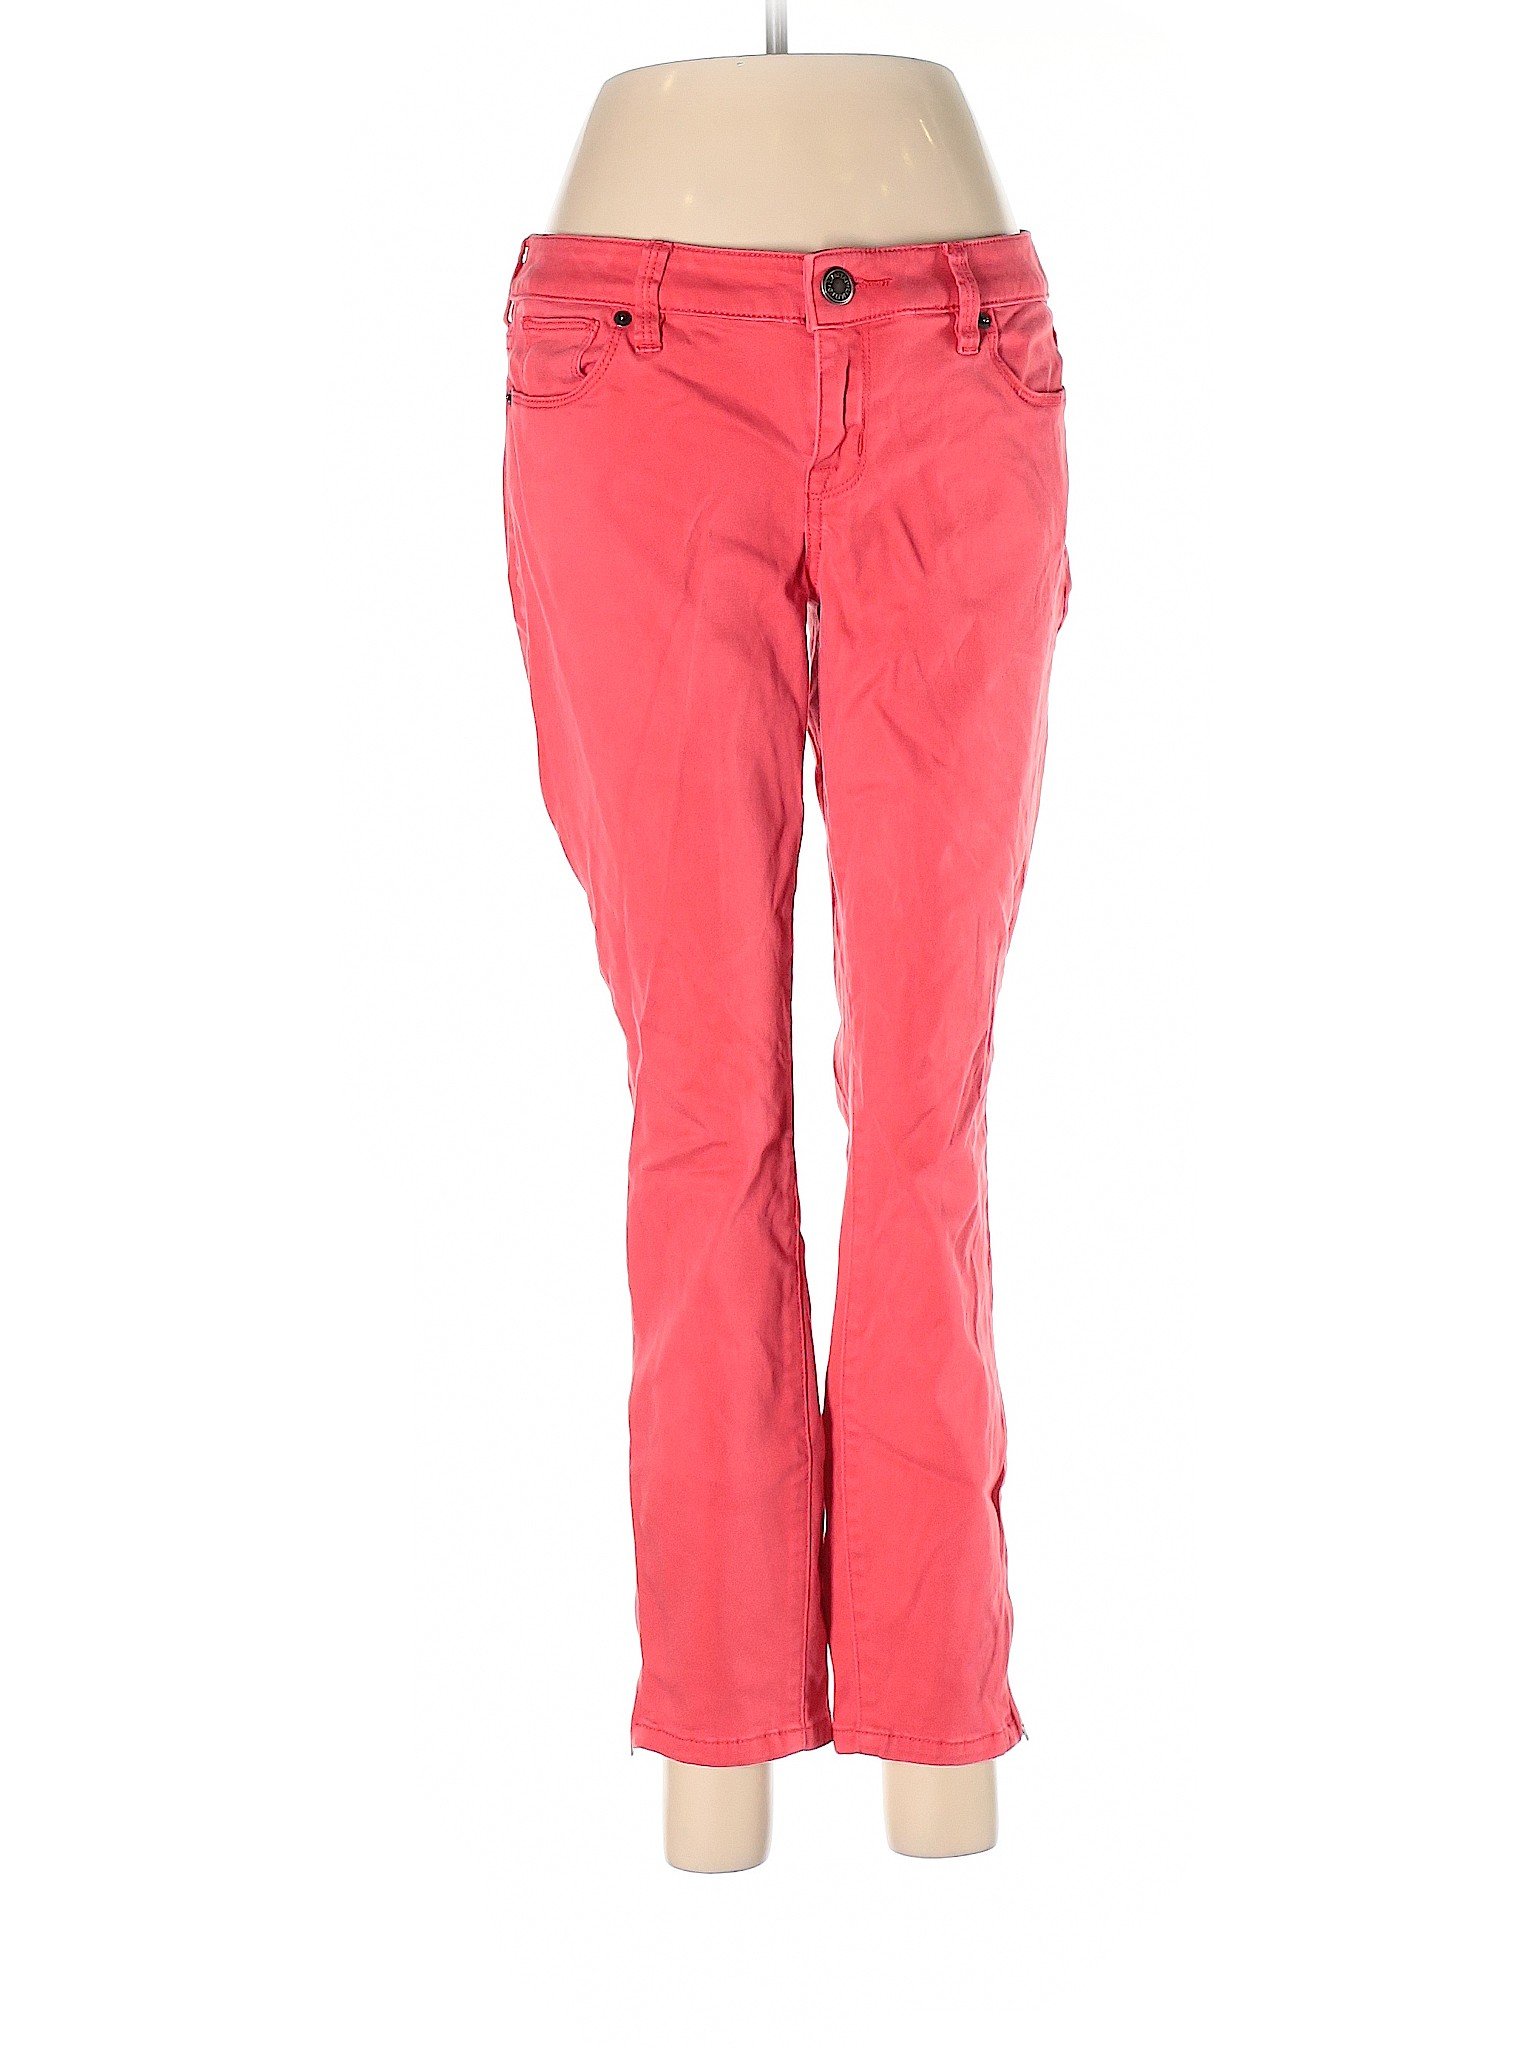 The Limited Women Pink Jeans 8 | eBay